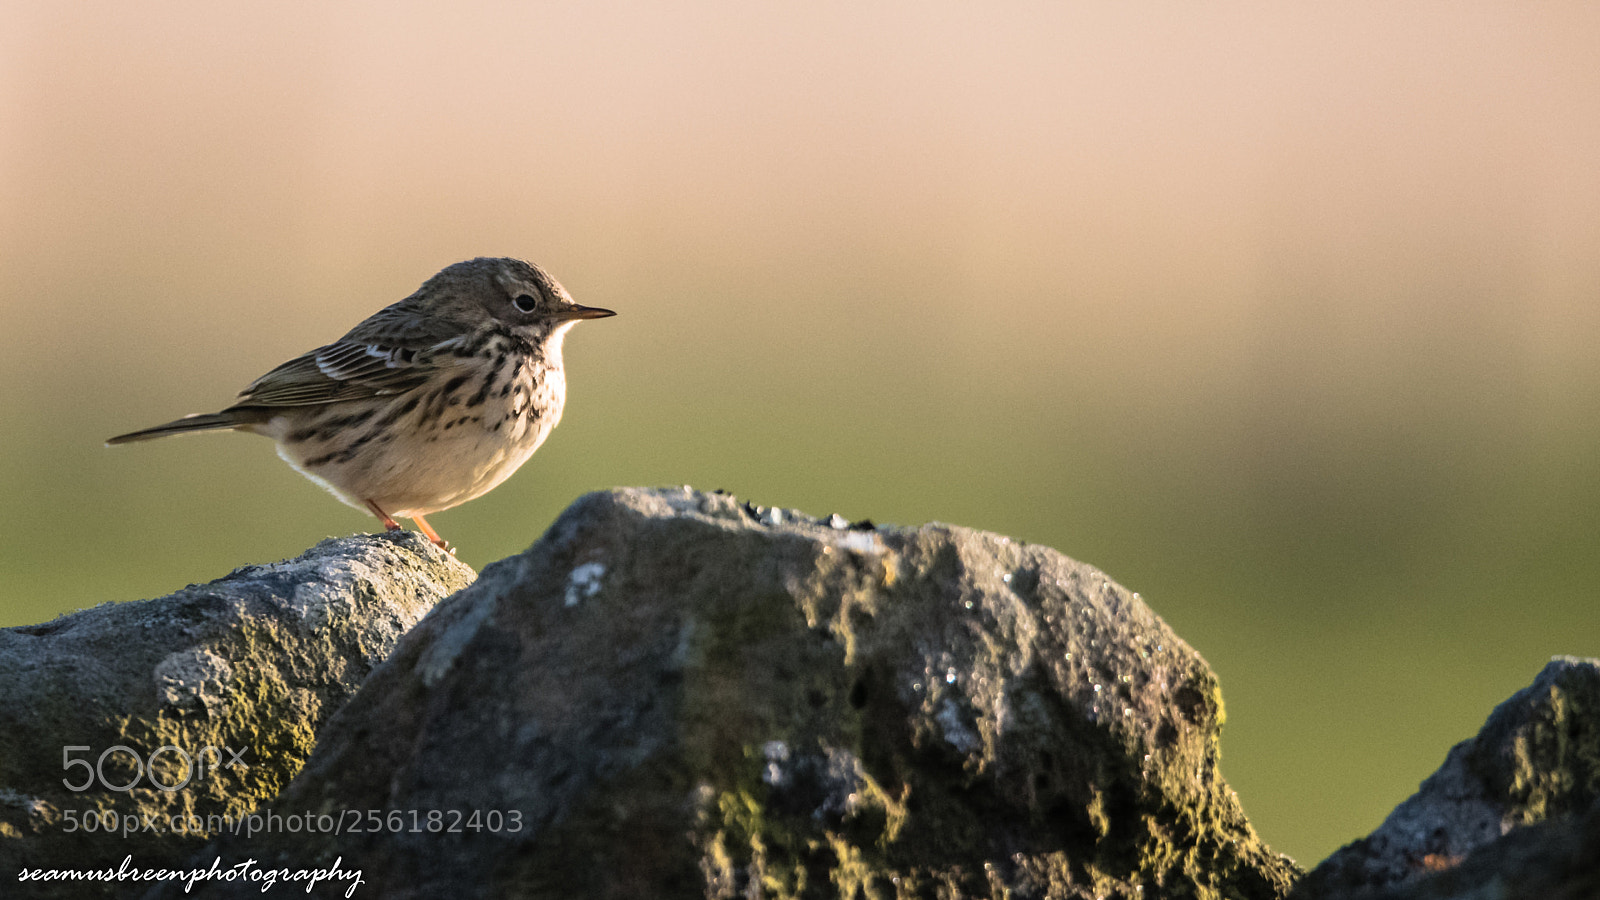 Nikon D850 sample photo. Meadow pipit in evening photography